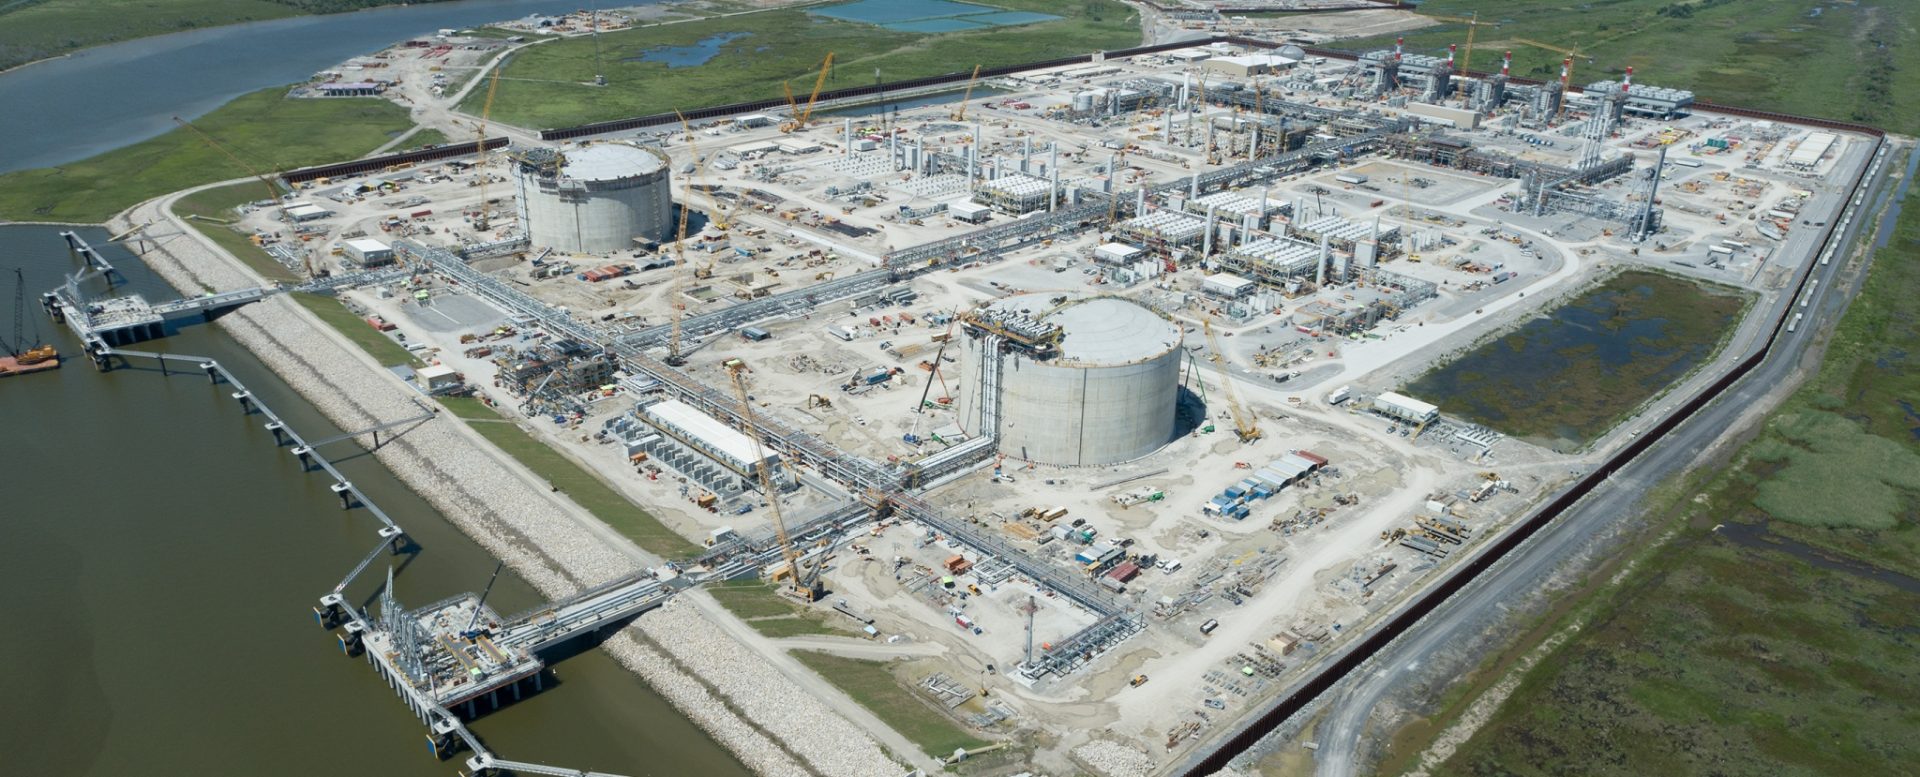 Venture Global ready to start LNG production at Calcasieu Pass